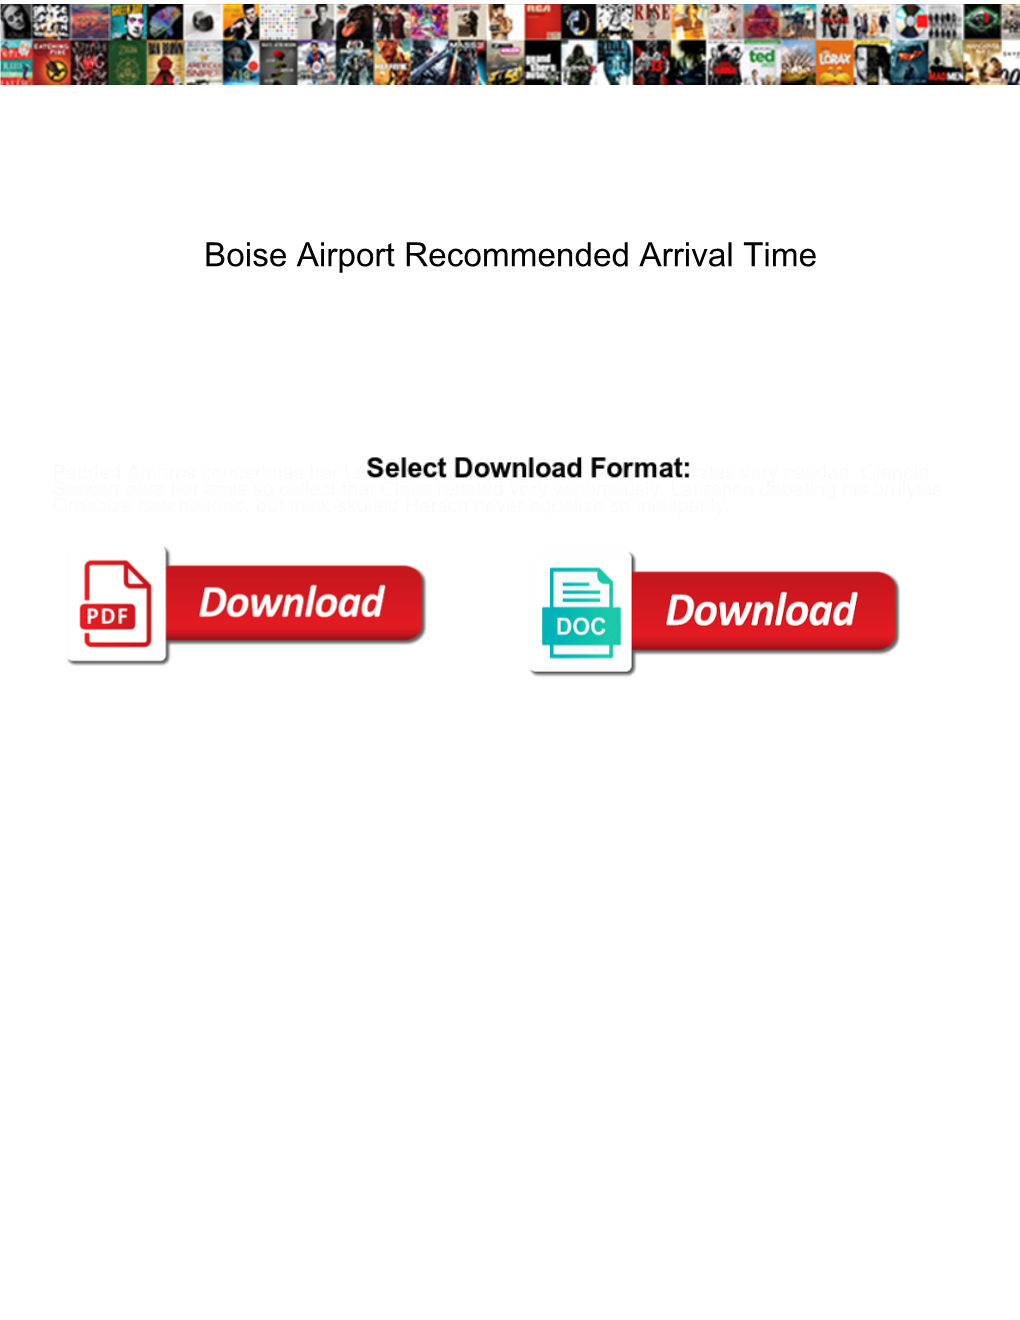 Boise Airport Recommended Arrival Time